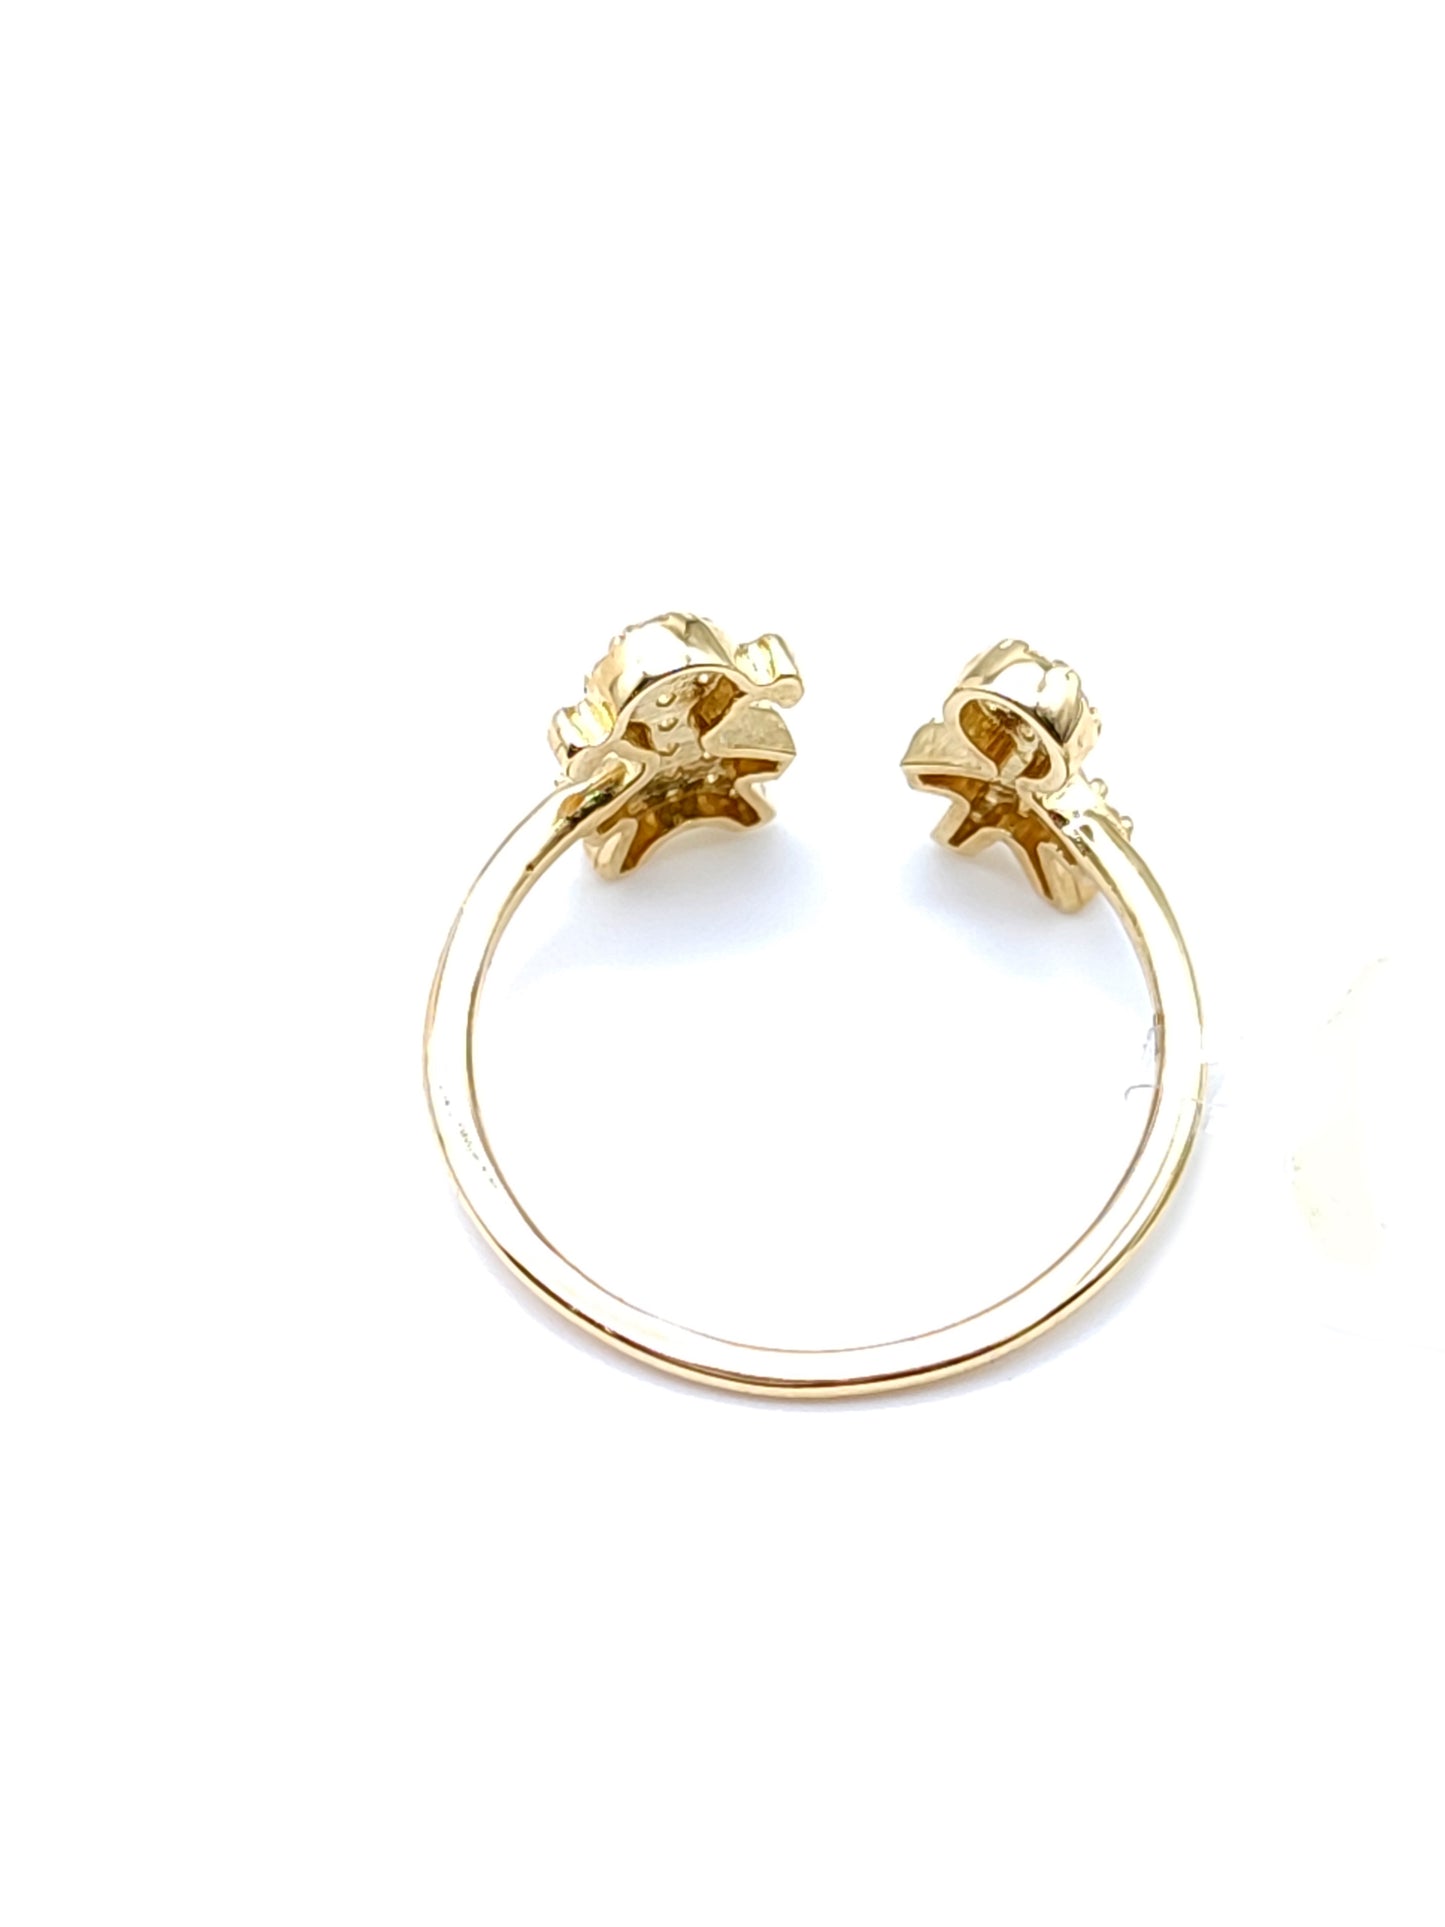 Gold ring with zircons for girls and boys ♡